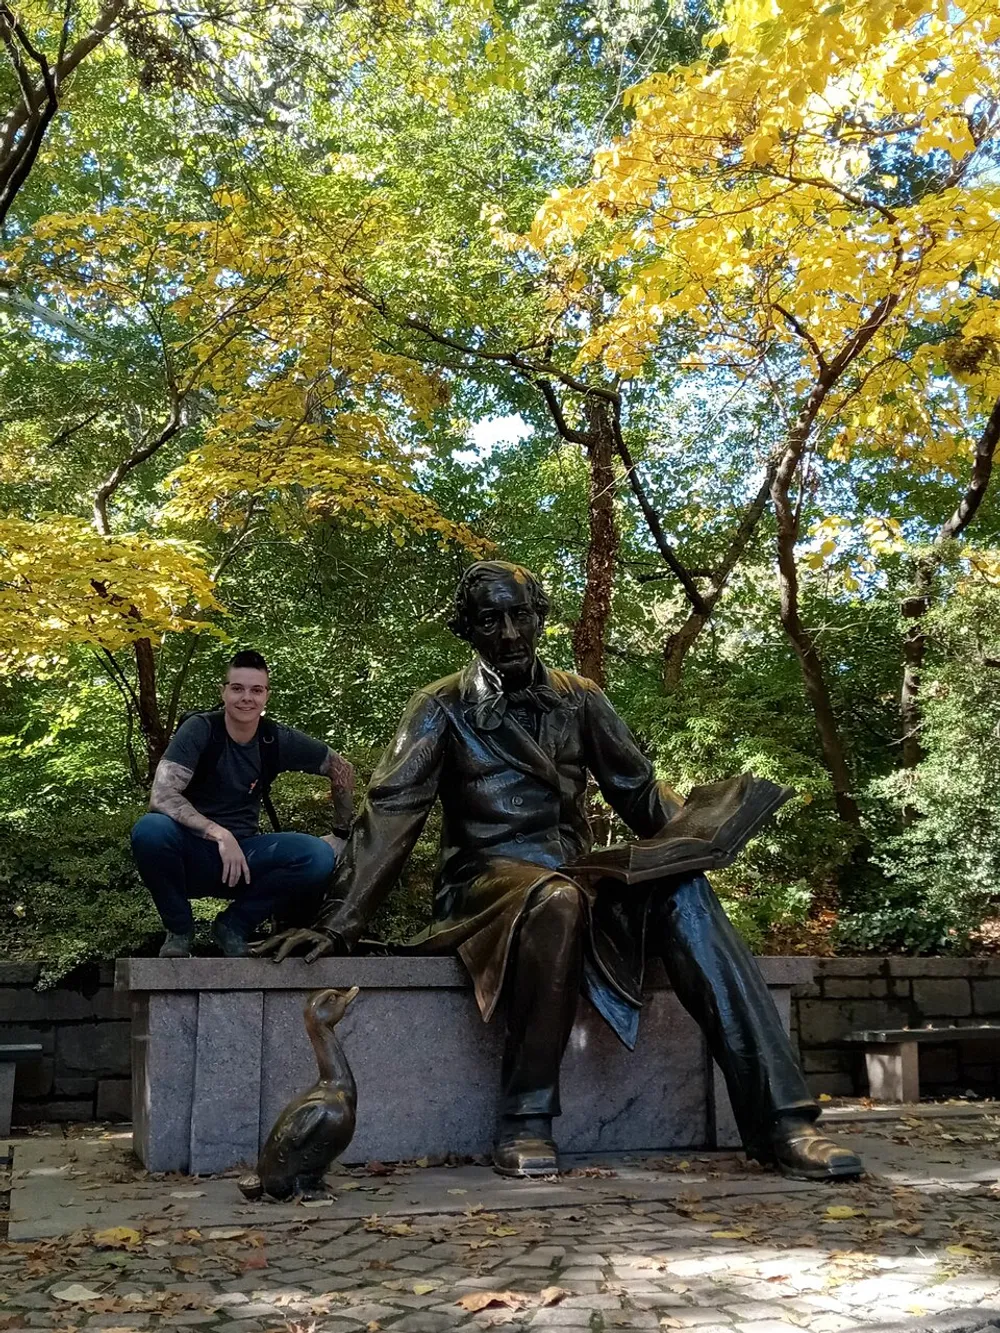 A person is posing next to a bronze statue of a seated figure holding a book with a duck at its base set against a backdrop of trees with autumn leaves